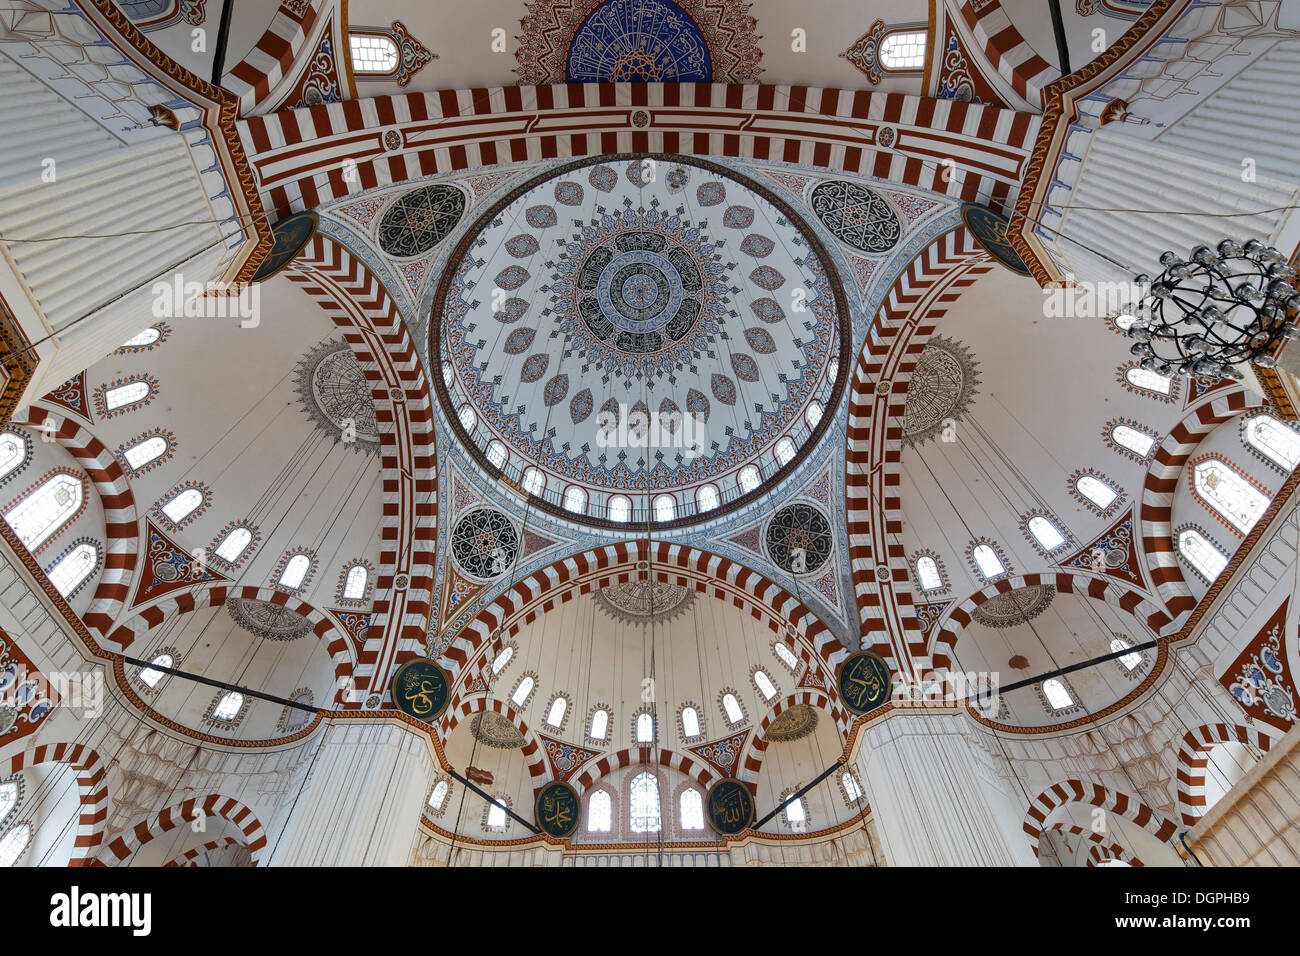 Sehzade Mosque, Prince Mosque, built by Sinan, Sehzade neighbourhood in the district of Fatih, Istanbul, Turkey, Europe Stock Photo